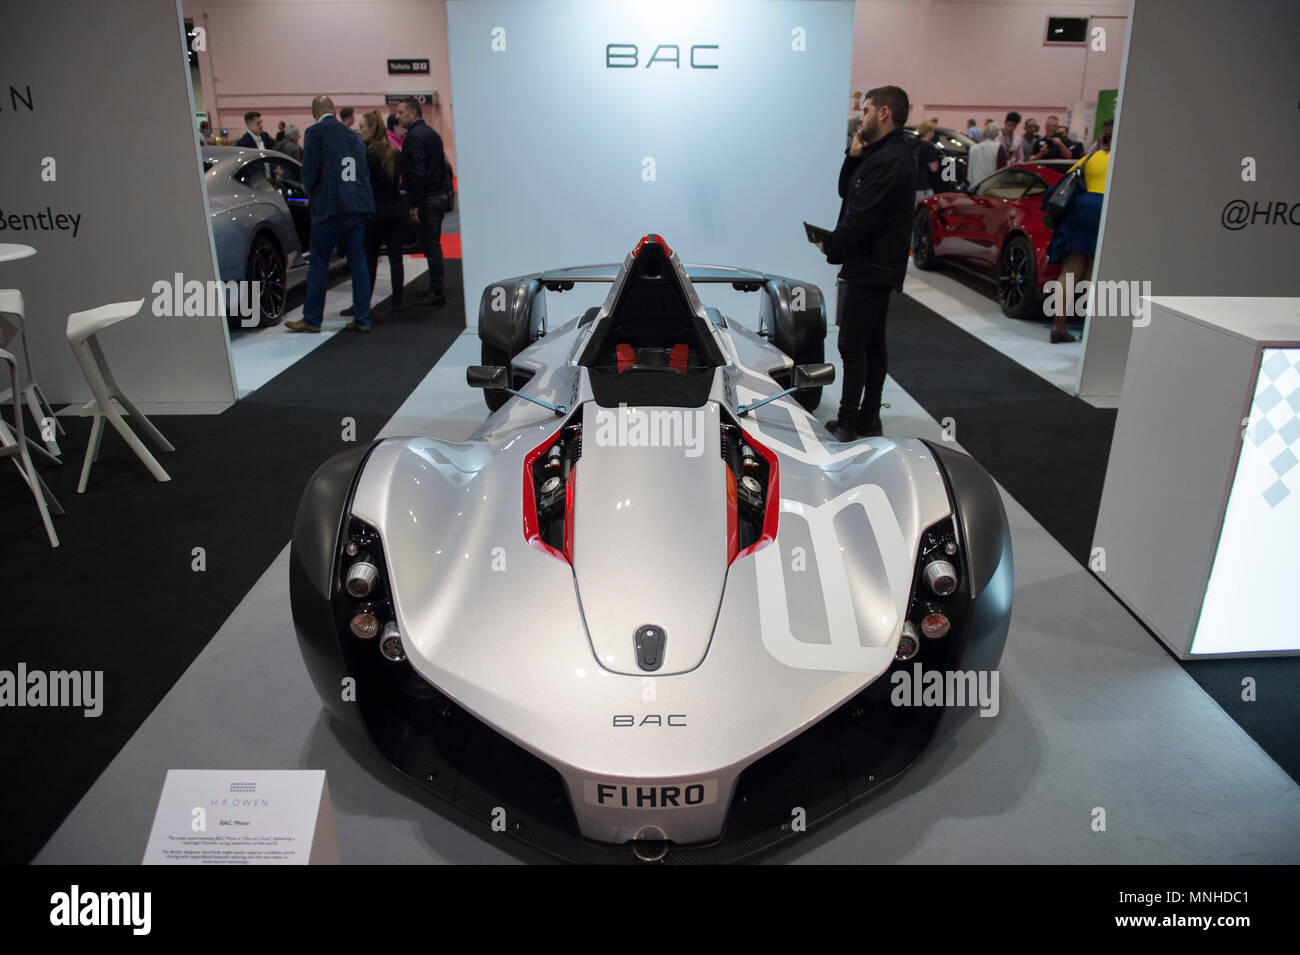 ExCel, London, UK. 17 May, 2018. The Confused.com London Motor Show event runs from 17-20 May 2018 with a space 4.5 times bigger than last year. Photo: The BAC Mono on H R Owen stand is a British designed road-legal Formula racing level car with 0-60mph acceleration in 2.8 secs. Credit: Malcolm Park/Alamy Live News. Stock Photo